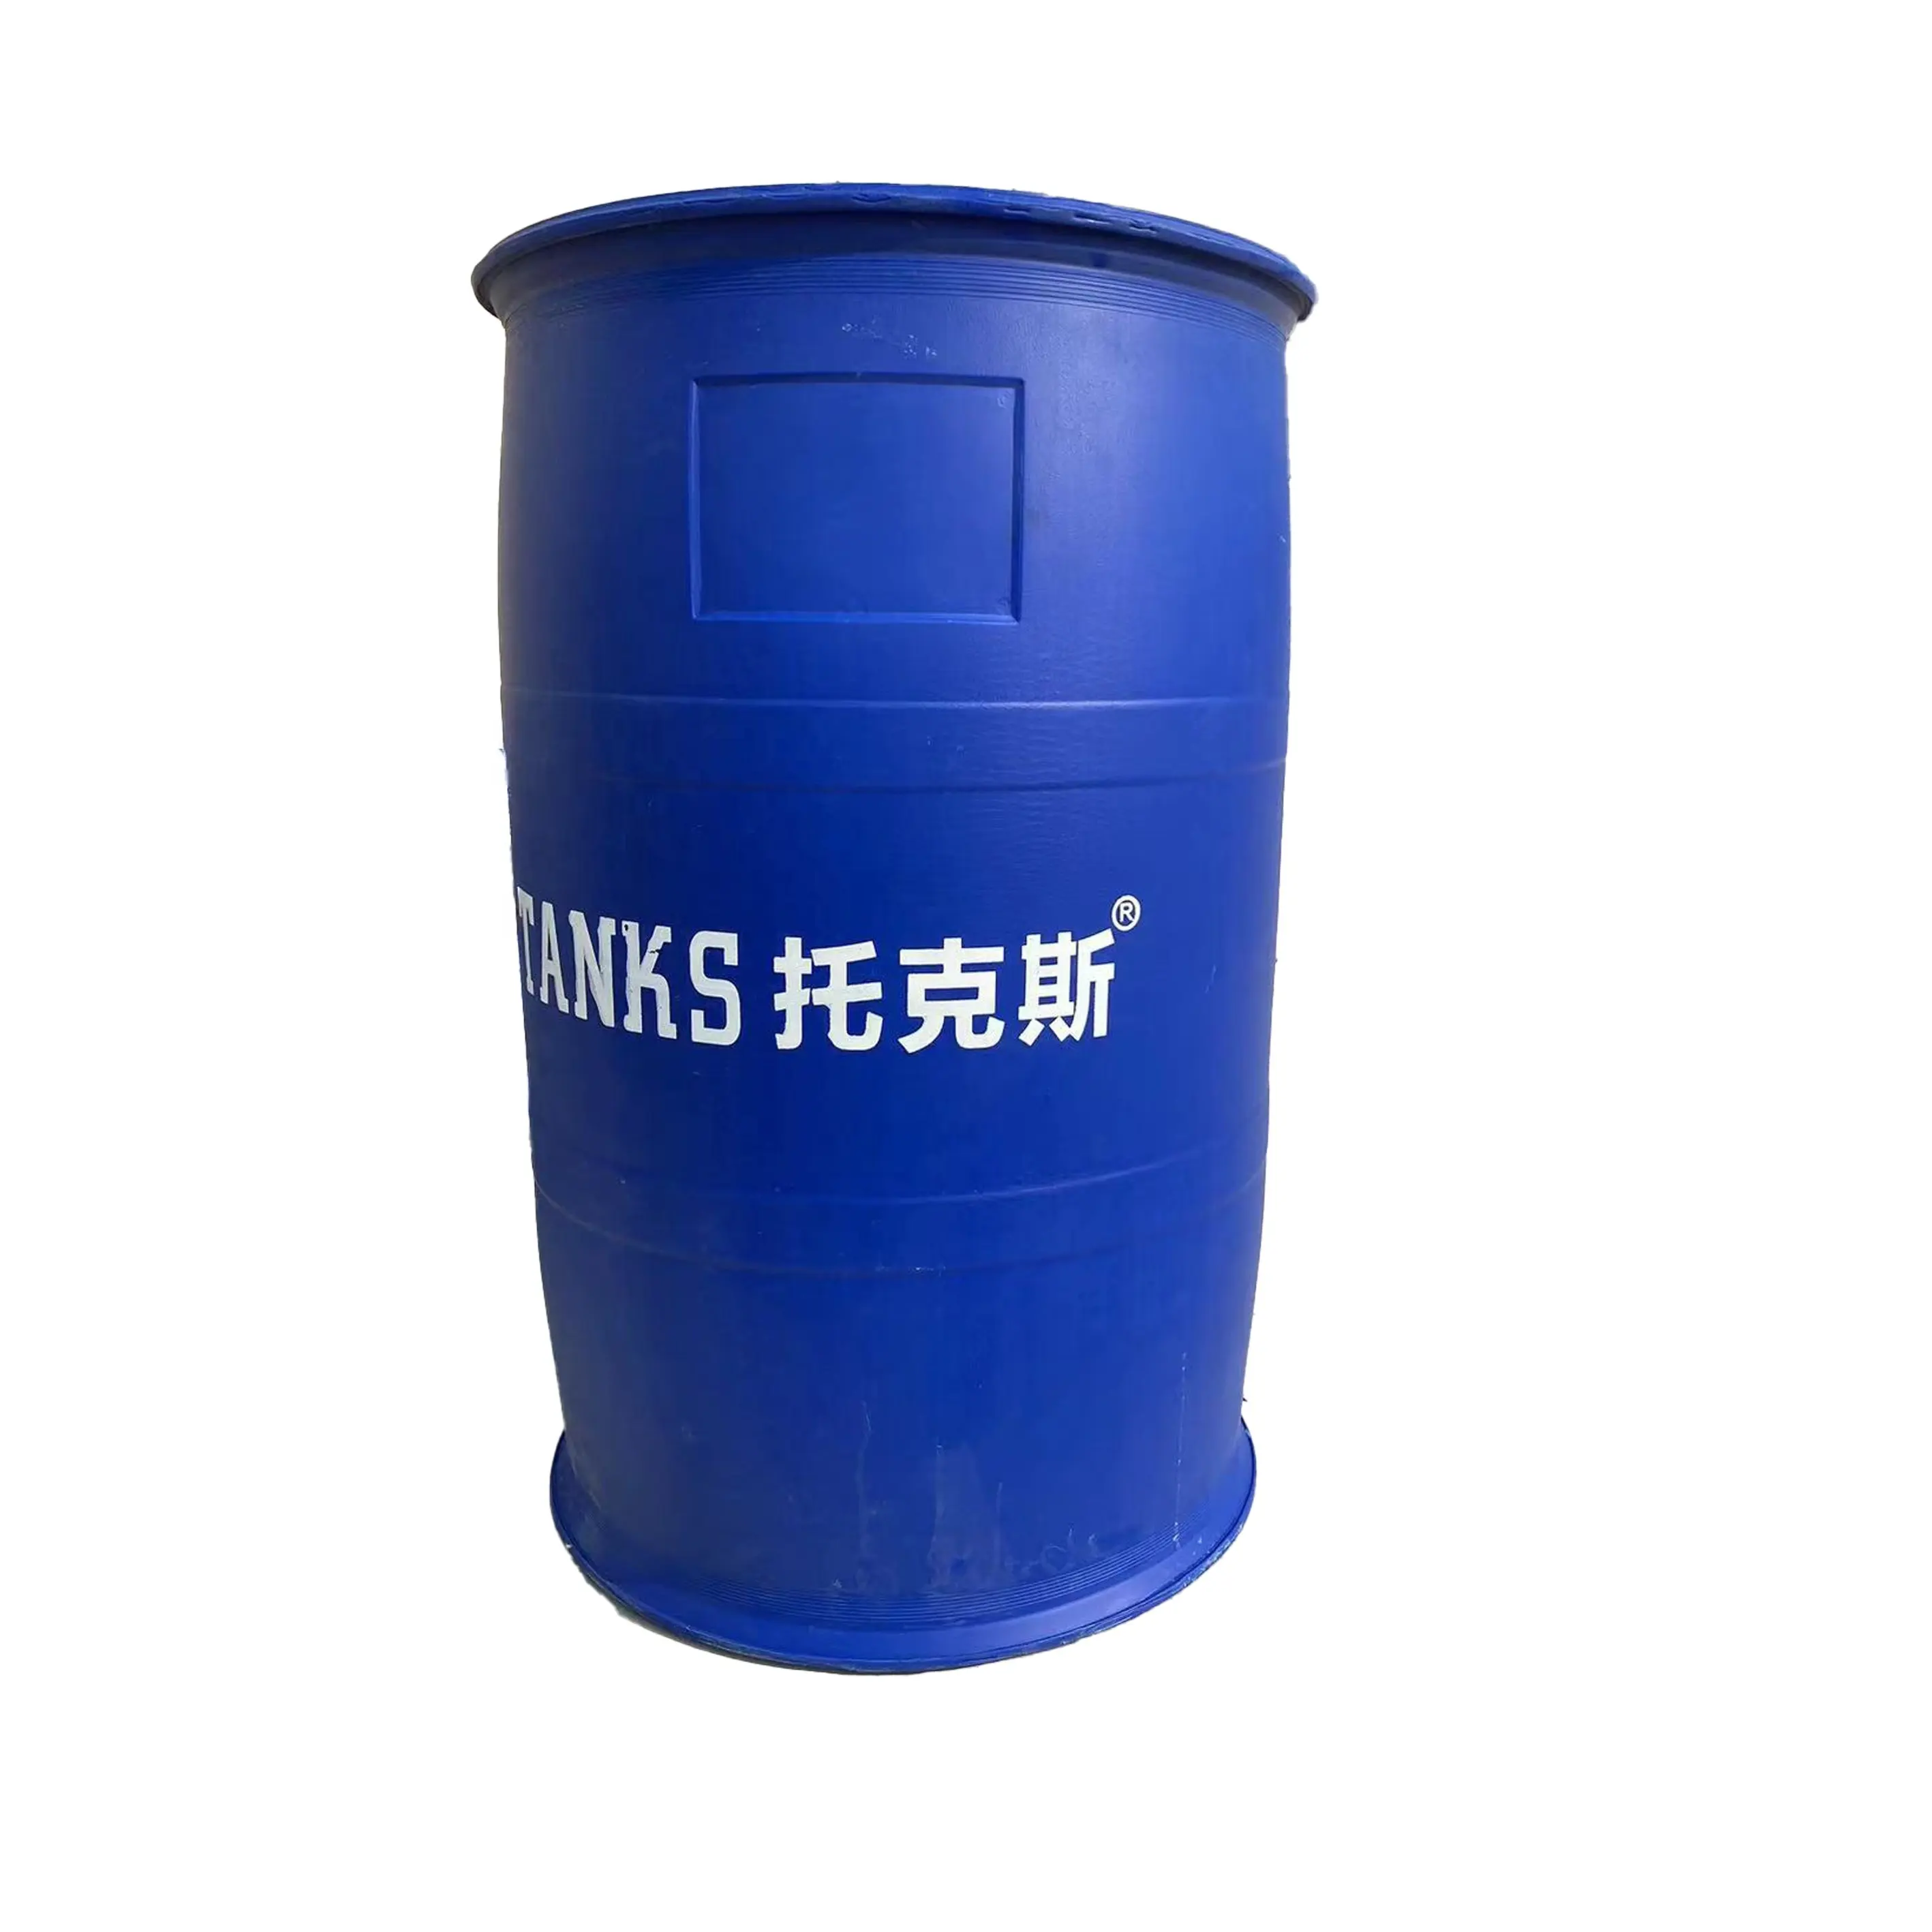 Antifreeze Concentrate Protect Radiator Antifreeze Coolant for Heating System